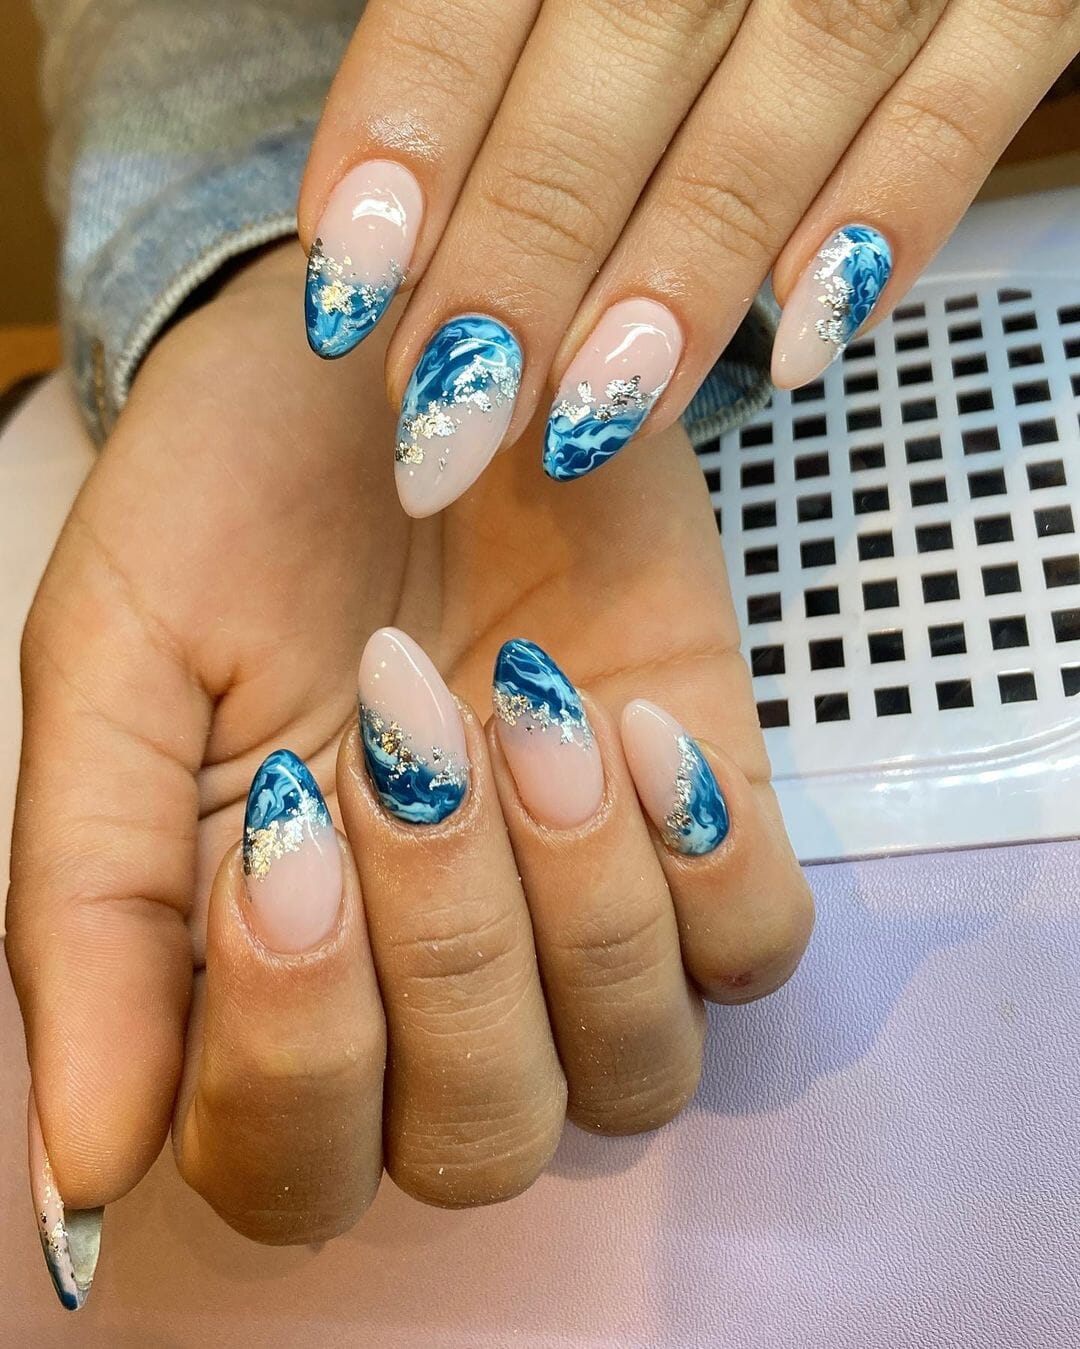 Milky White Nails With Design